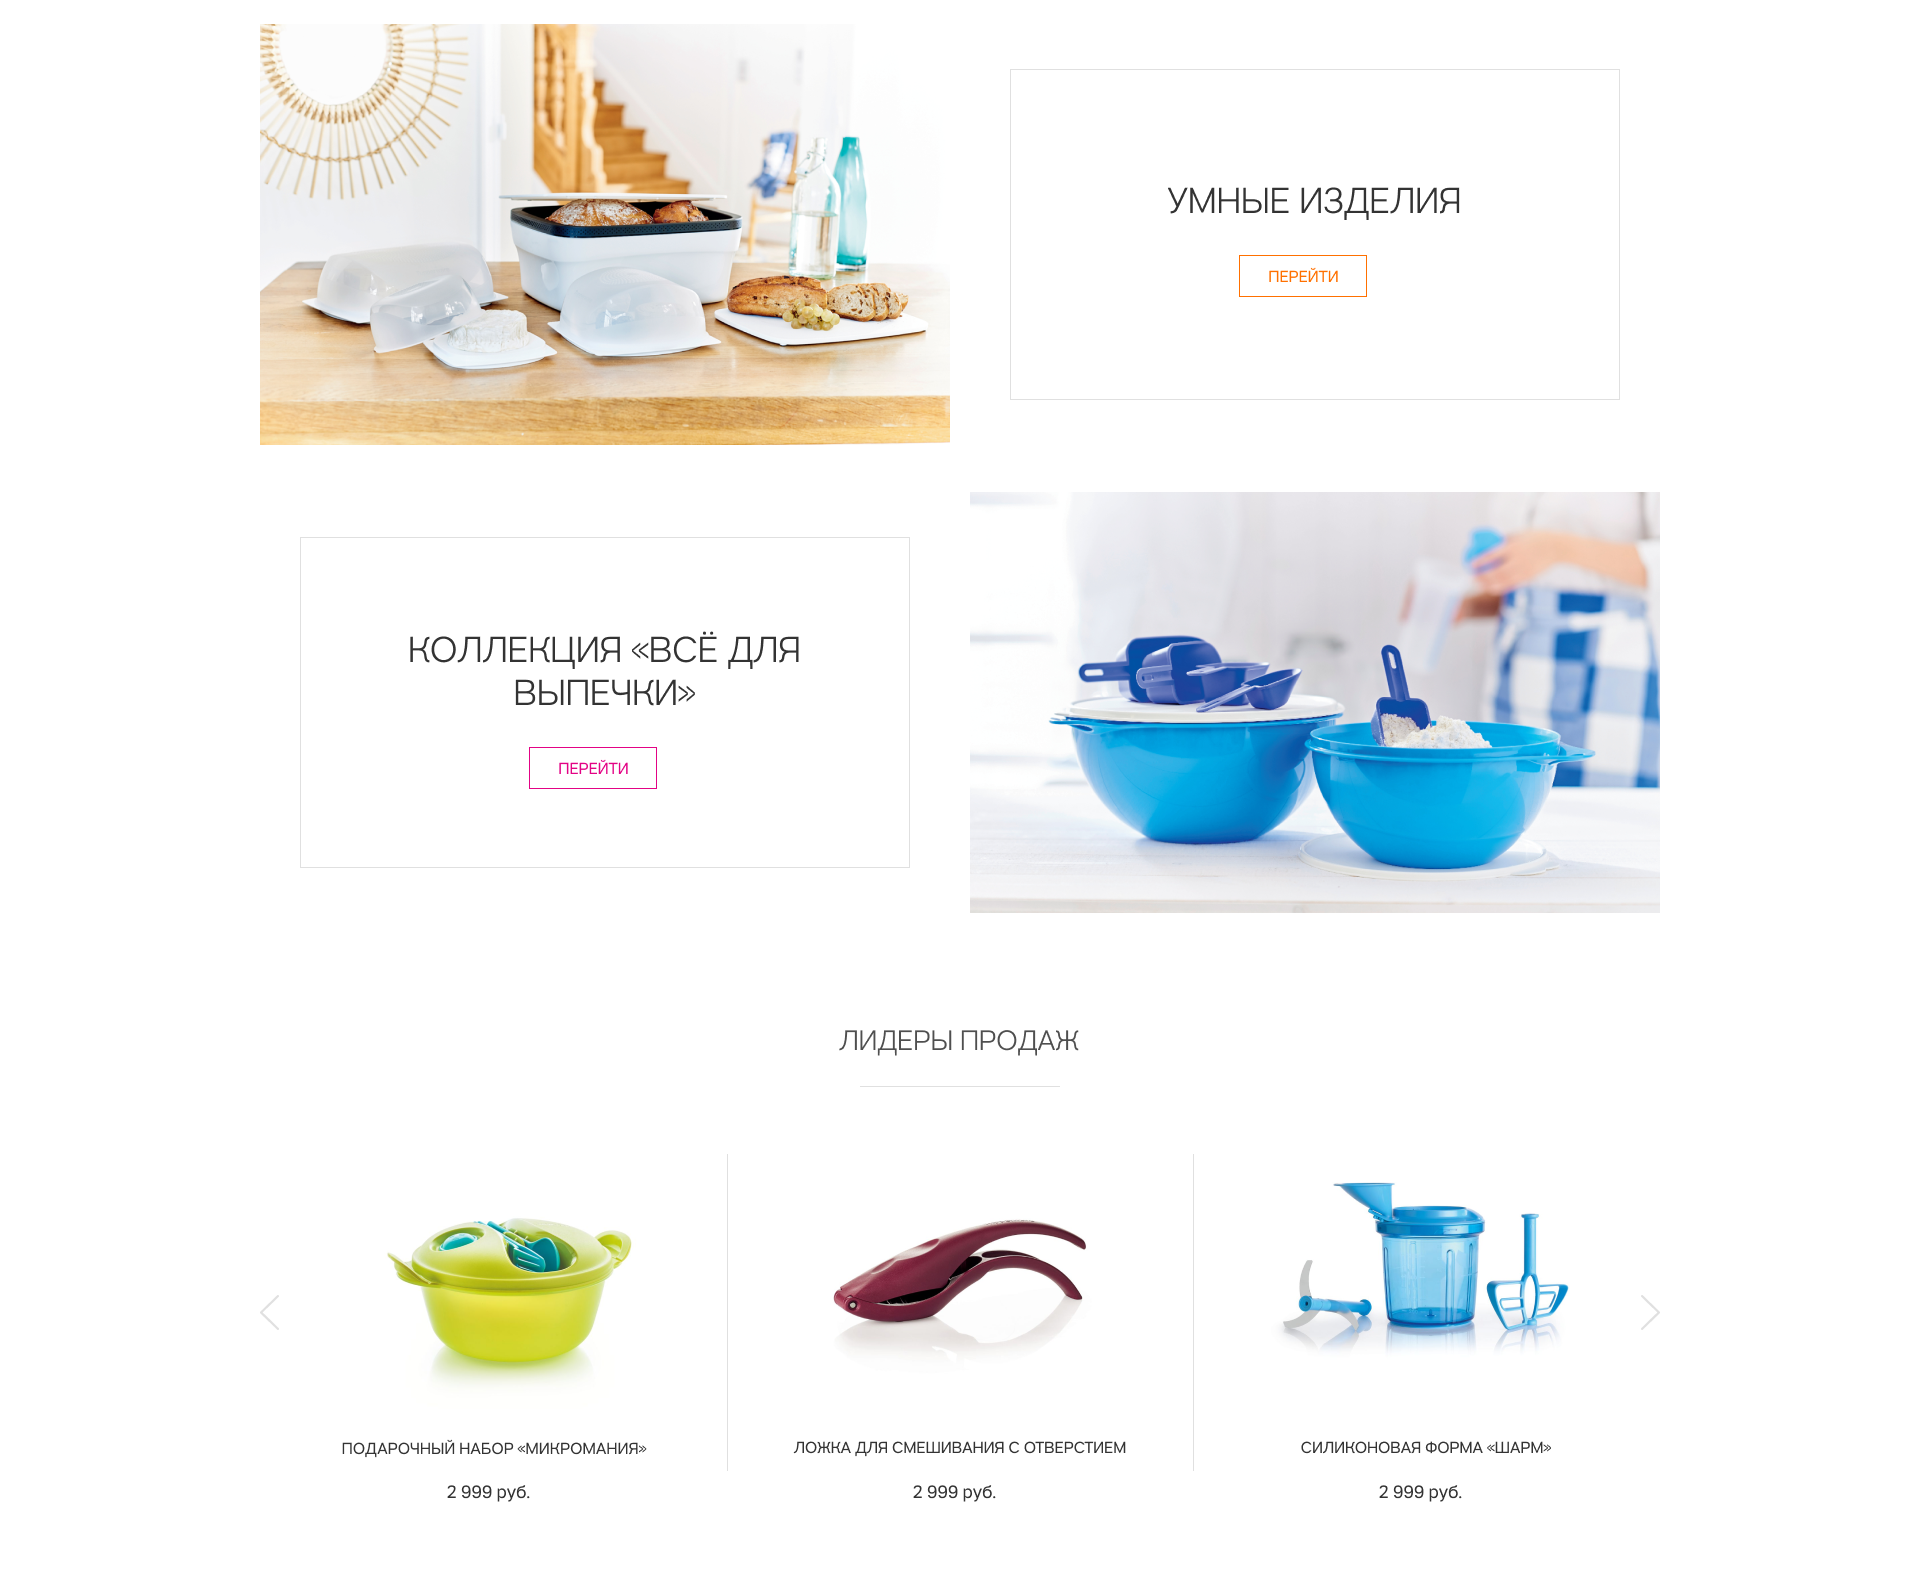 Design of most popular items section showing different items of kitchenware